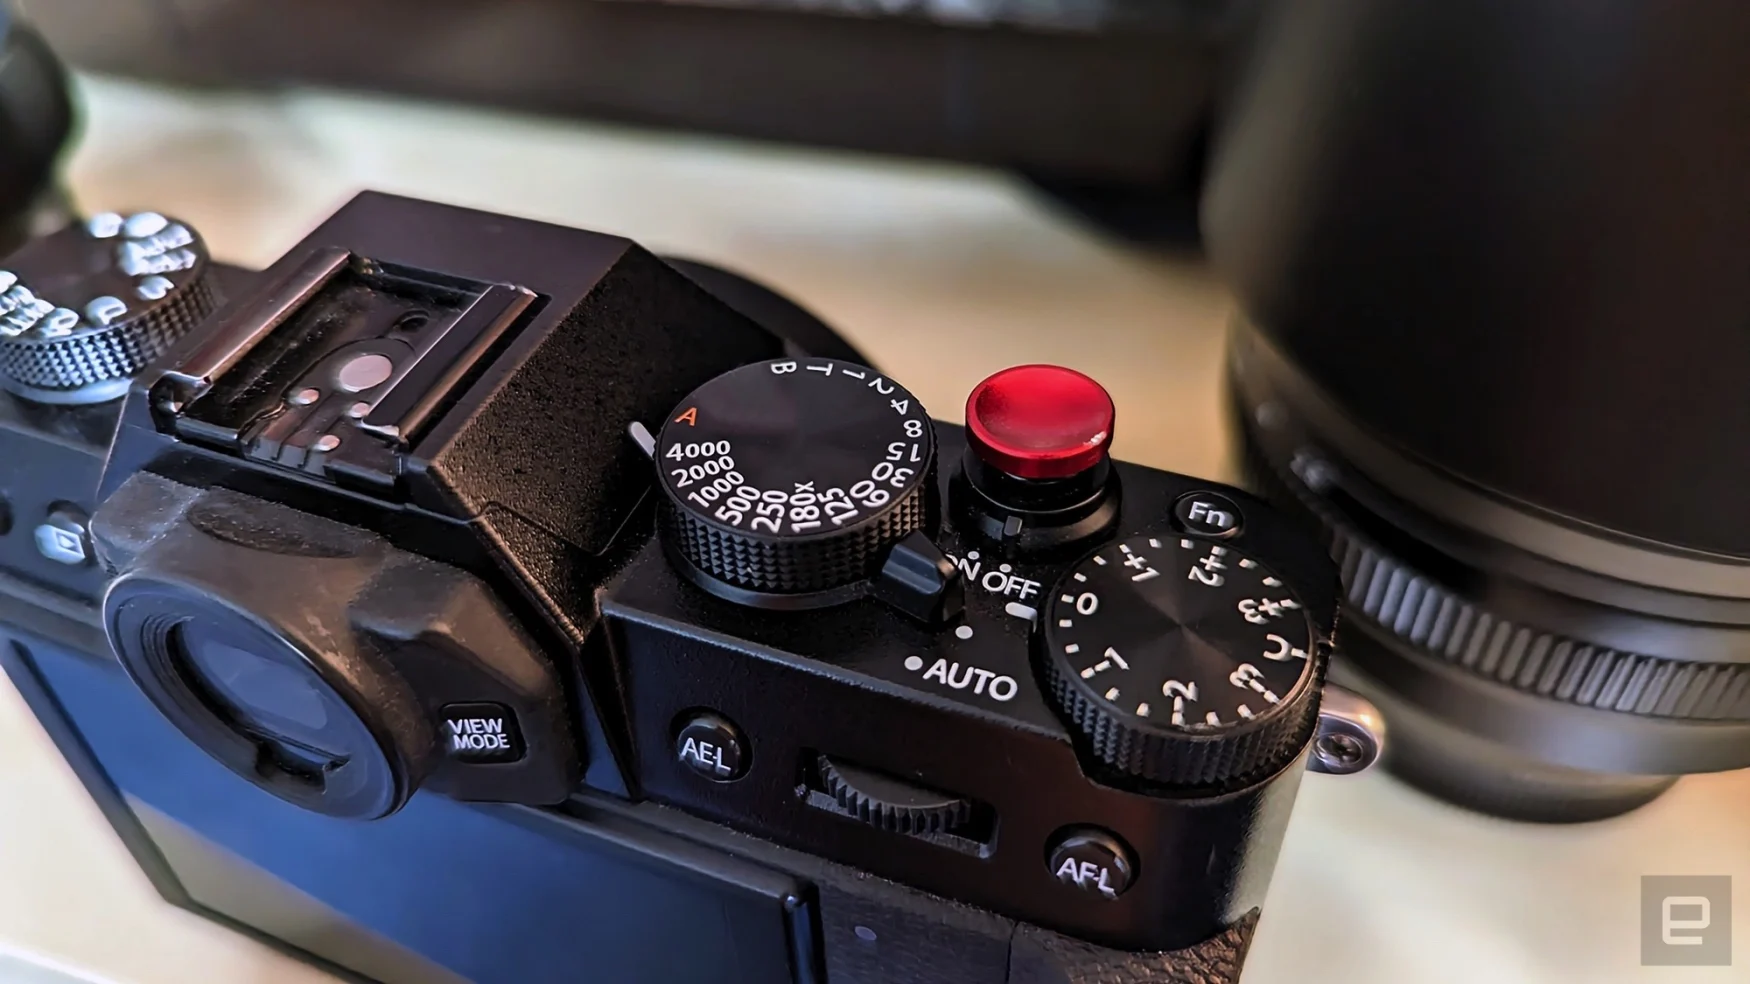 What we bought: The Fujifilm X-T30 is the perfect |